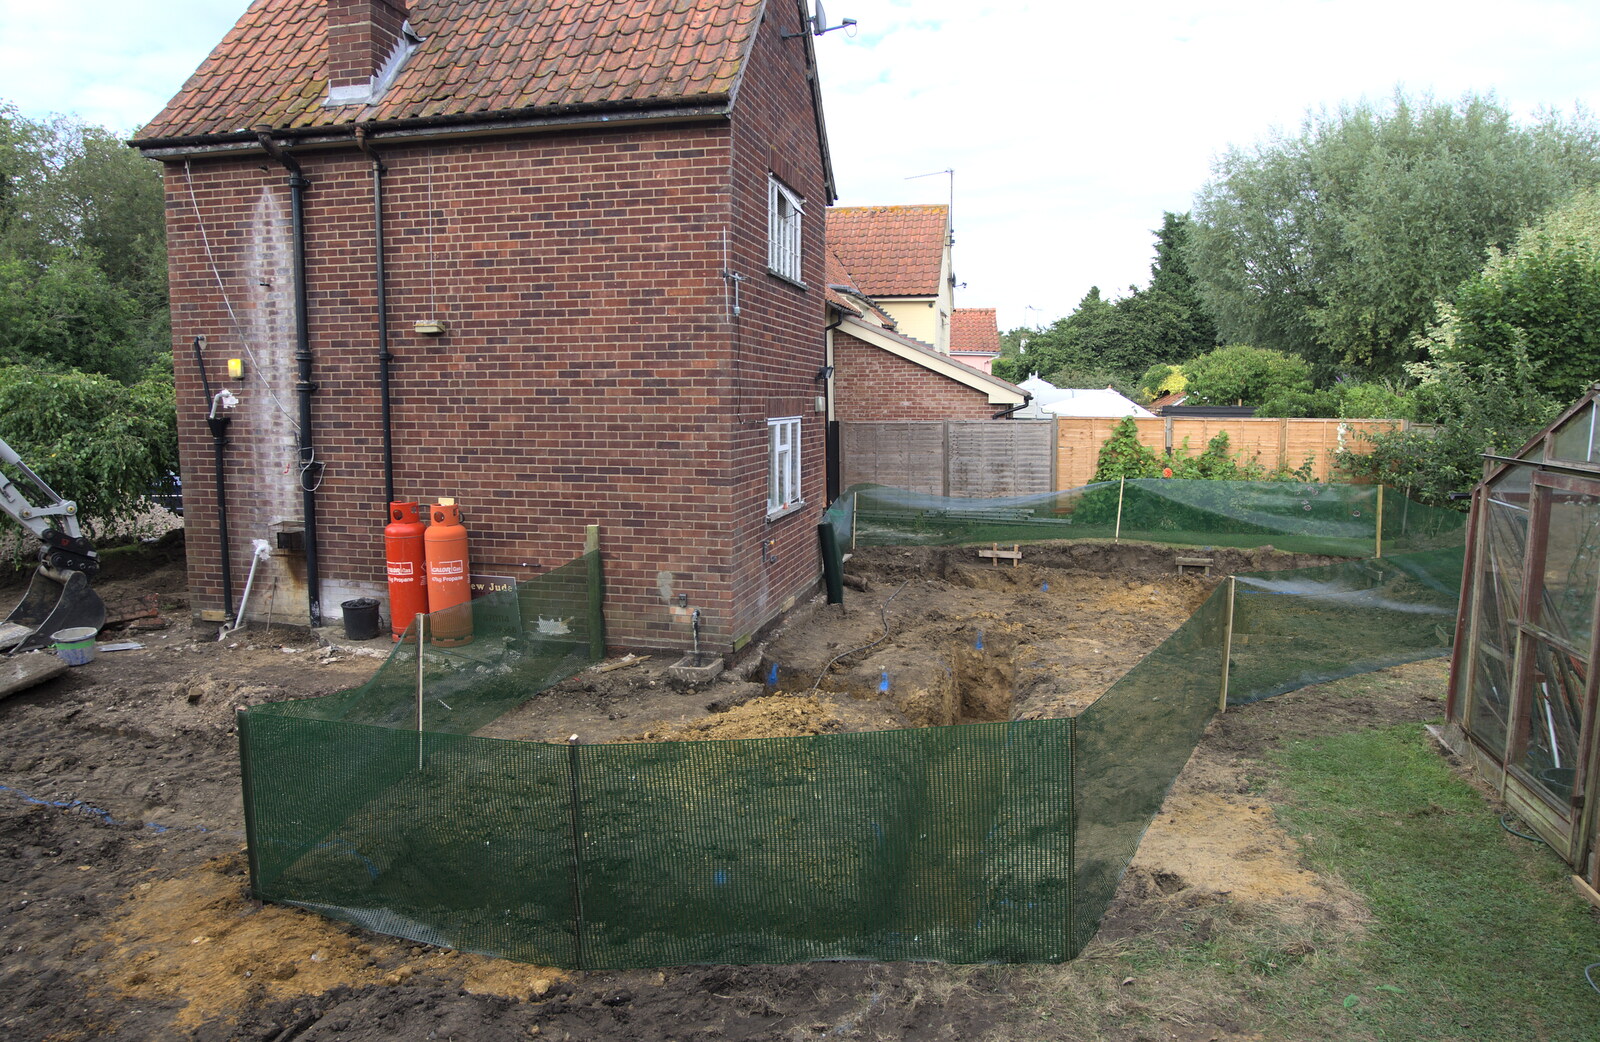 The footings are fenced off from Grand Designs: Building Commences, Brome, Suffolk - 8th August 2013